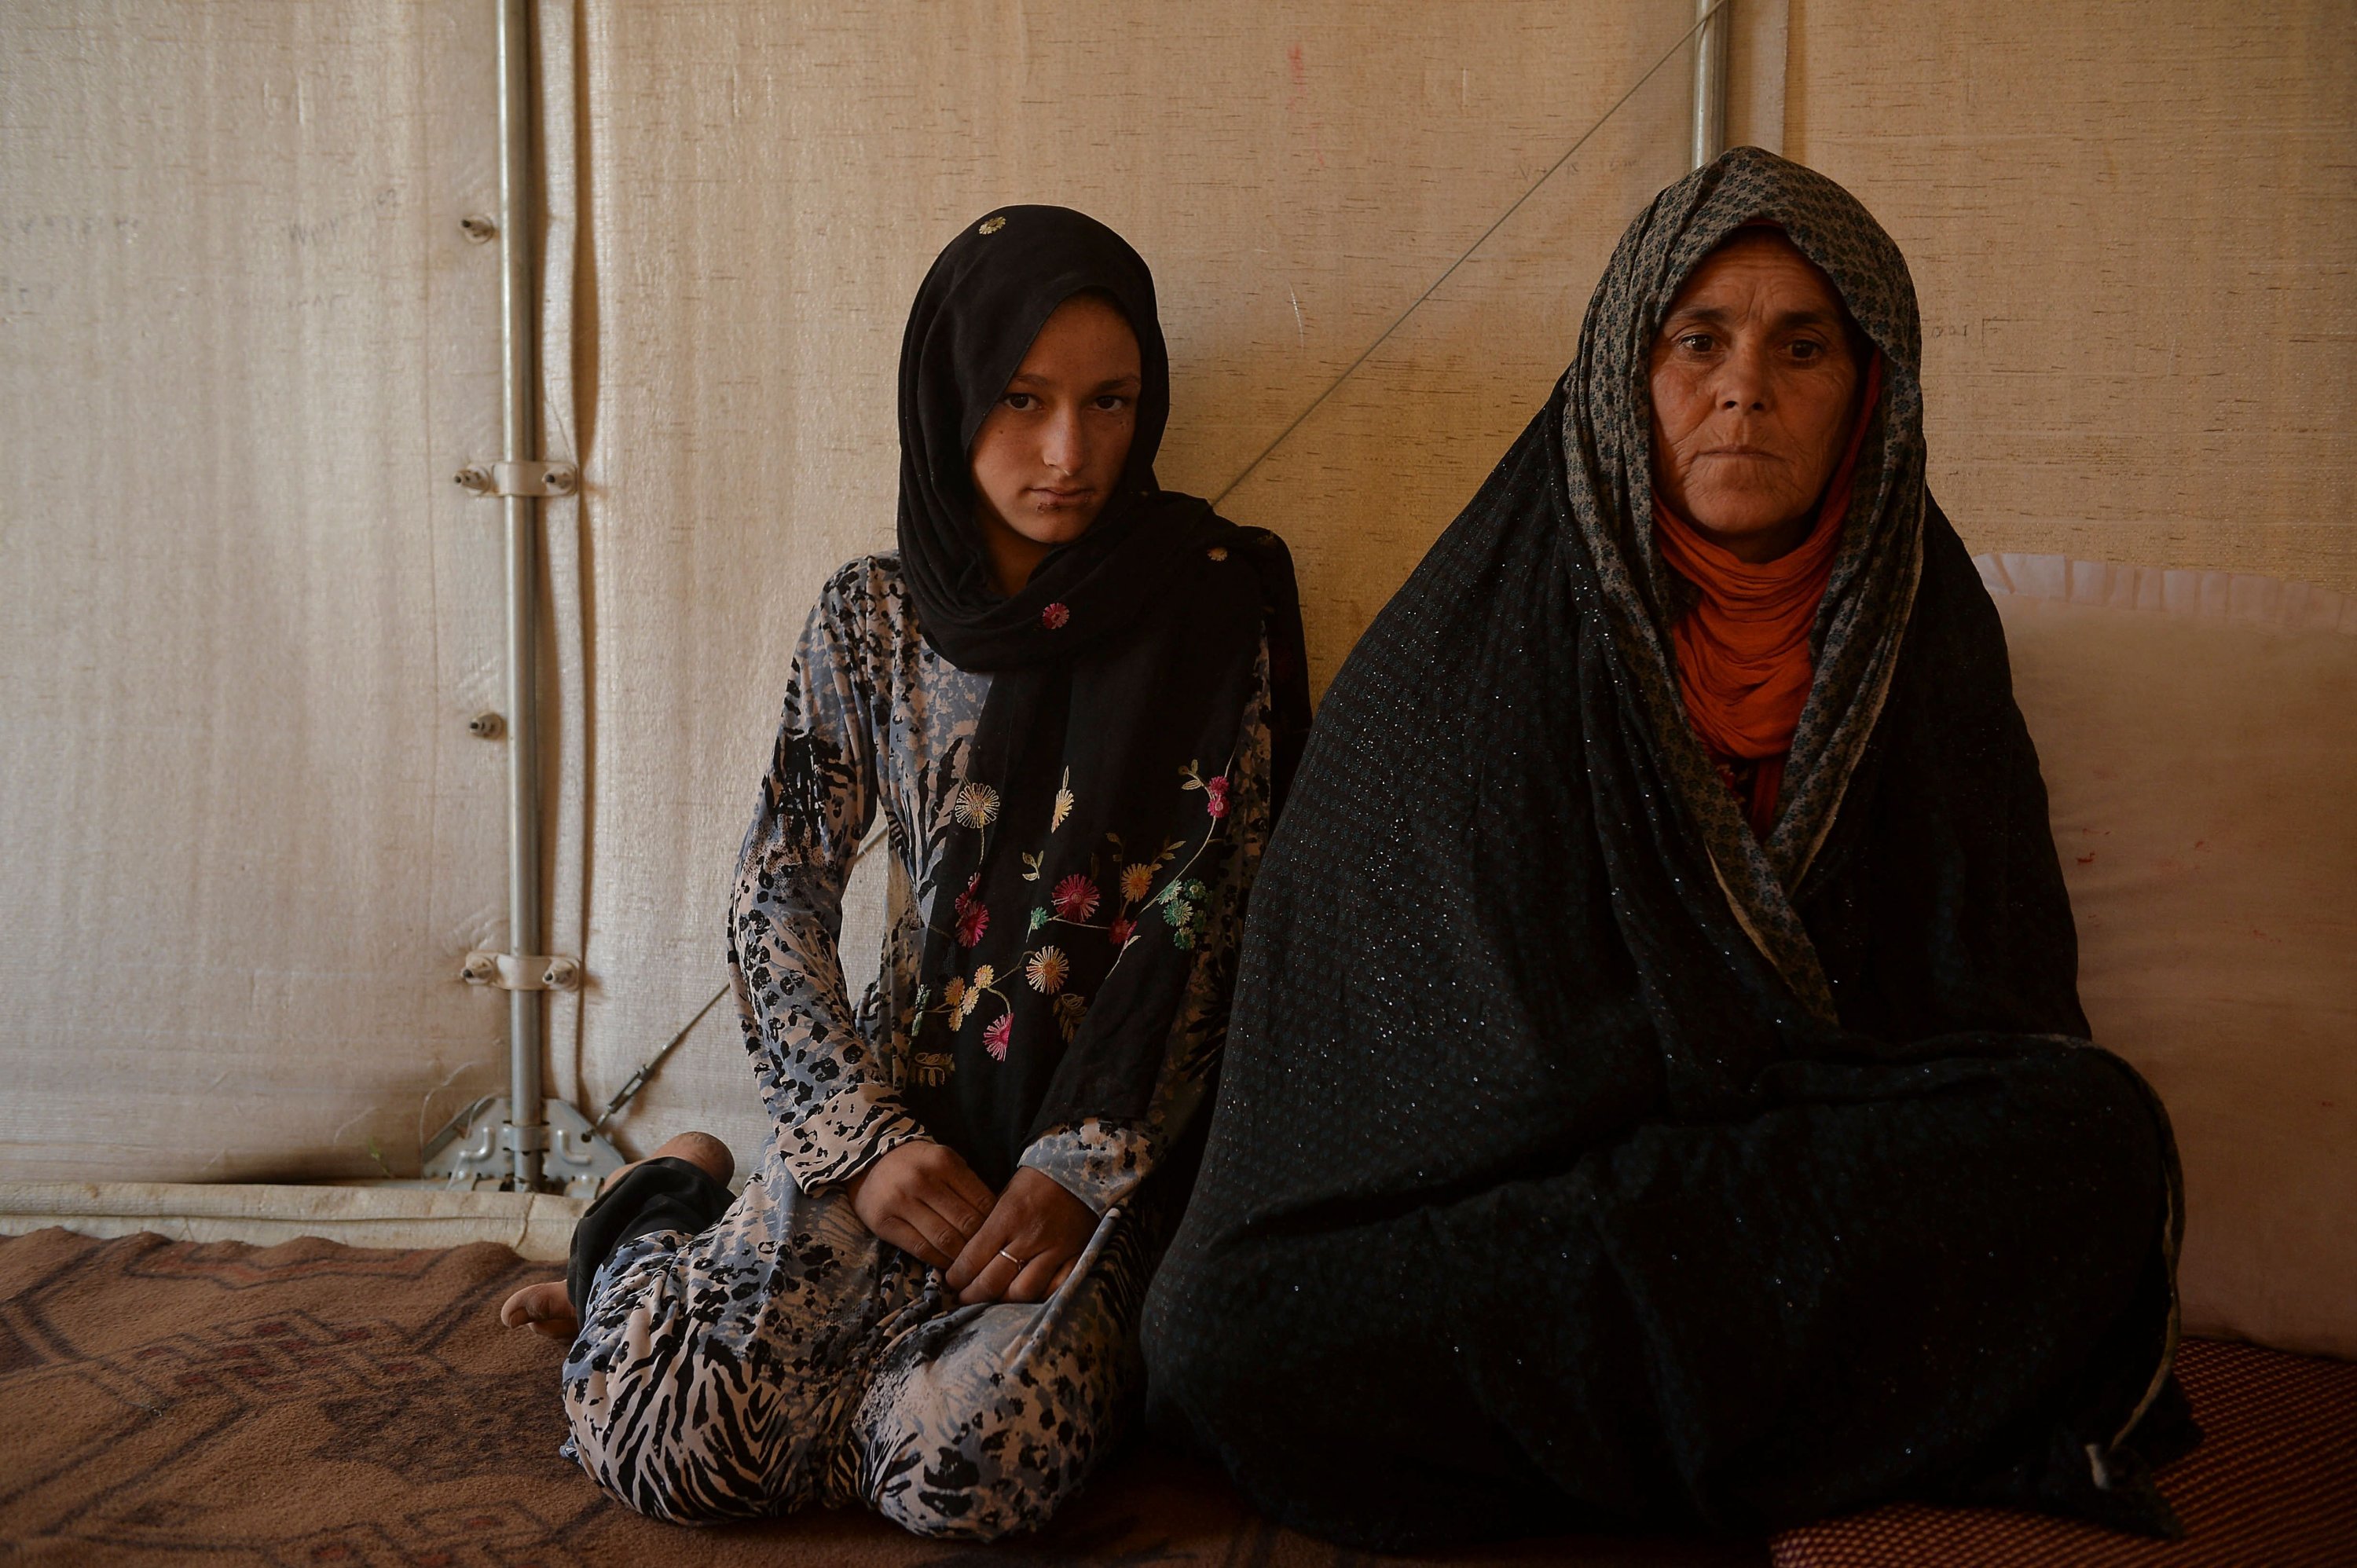 Habibeh (L), a girl who lives with her mother Rabia (R) but should have gone to join her future spouse